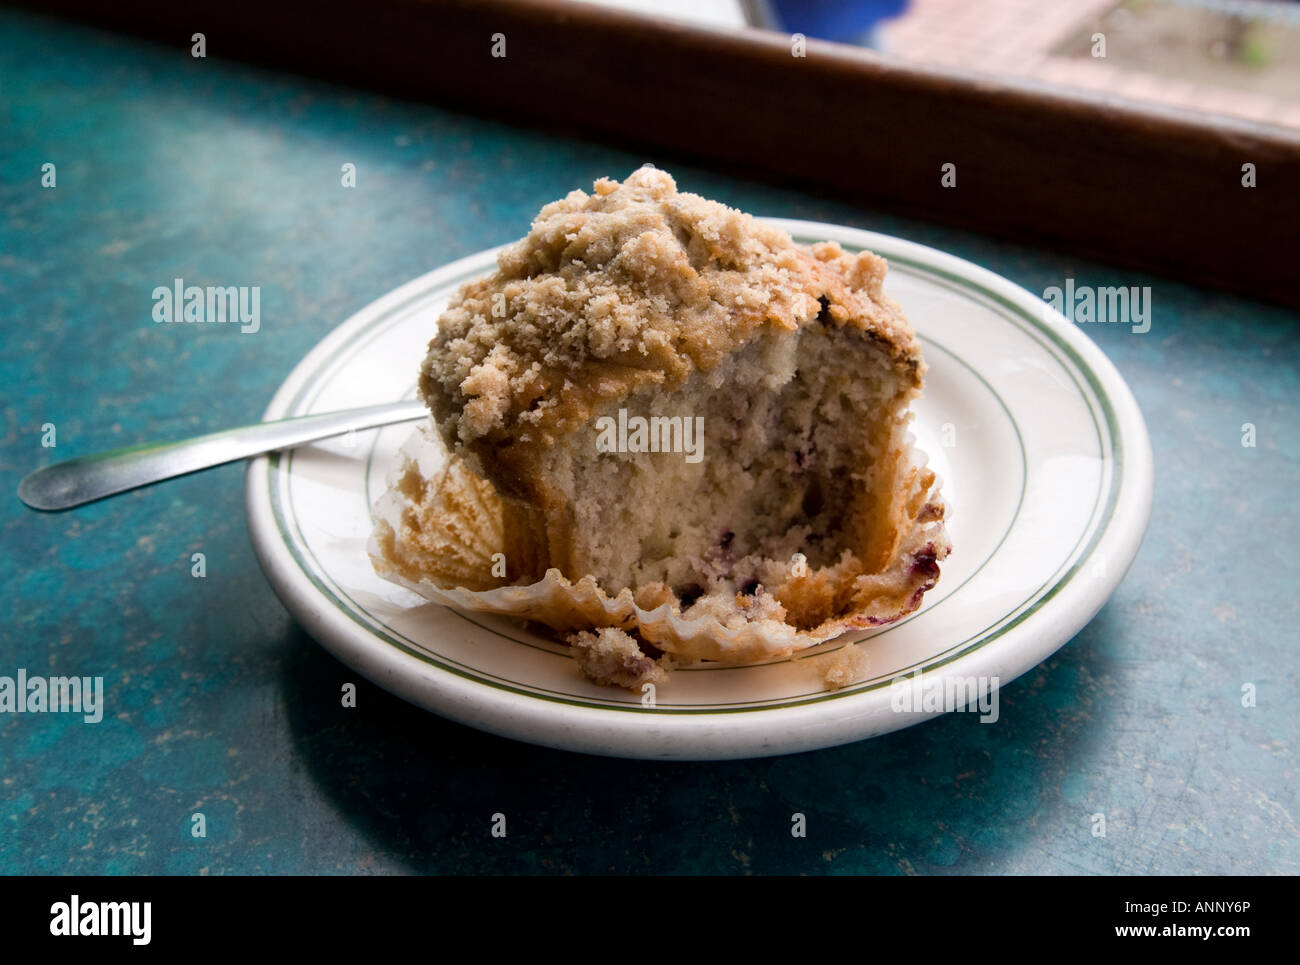 Fork and partially eaten crumb cake muffin on a plate and a cup of coffee in a cafe Stock Photo